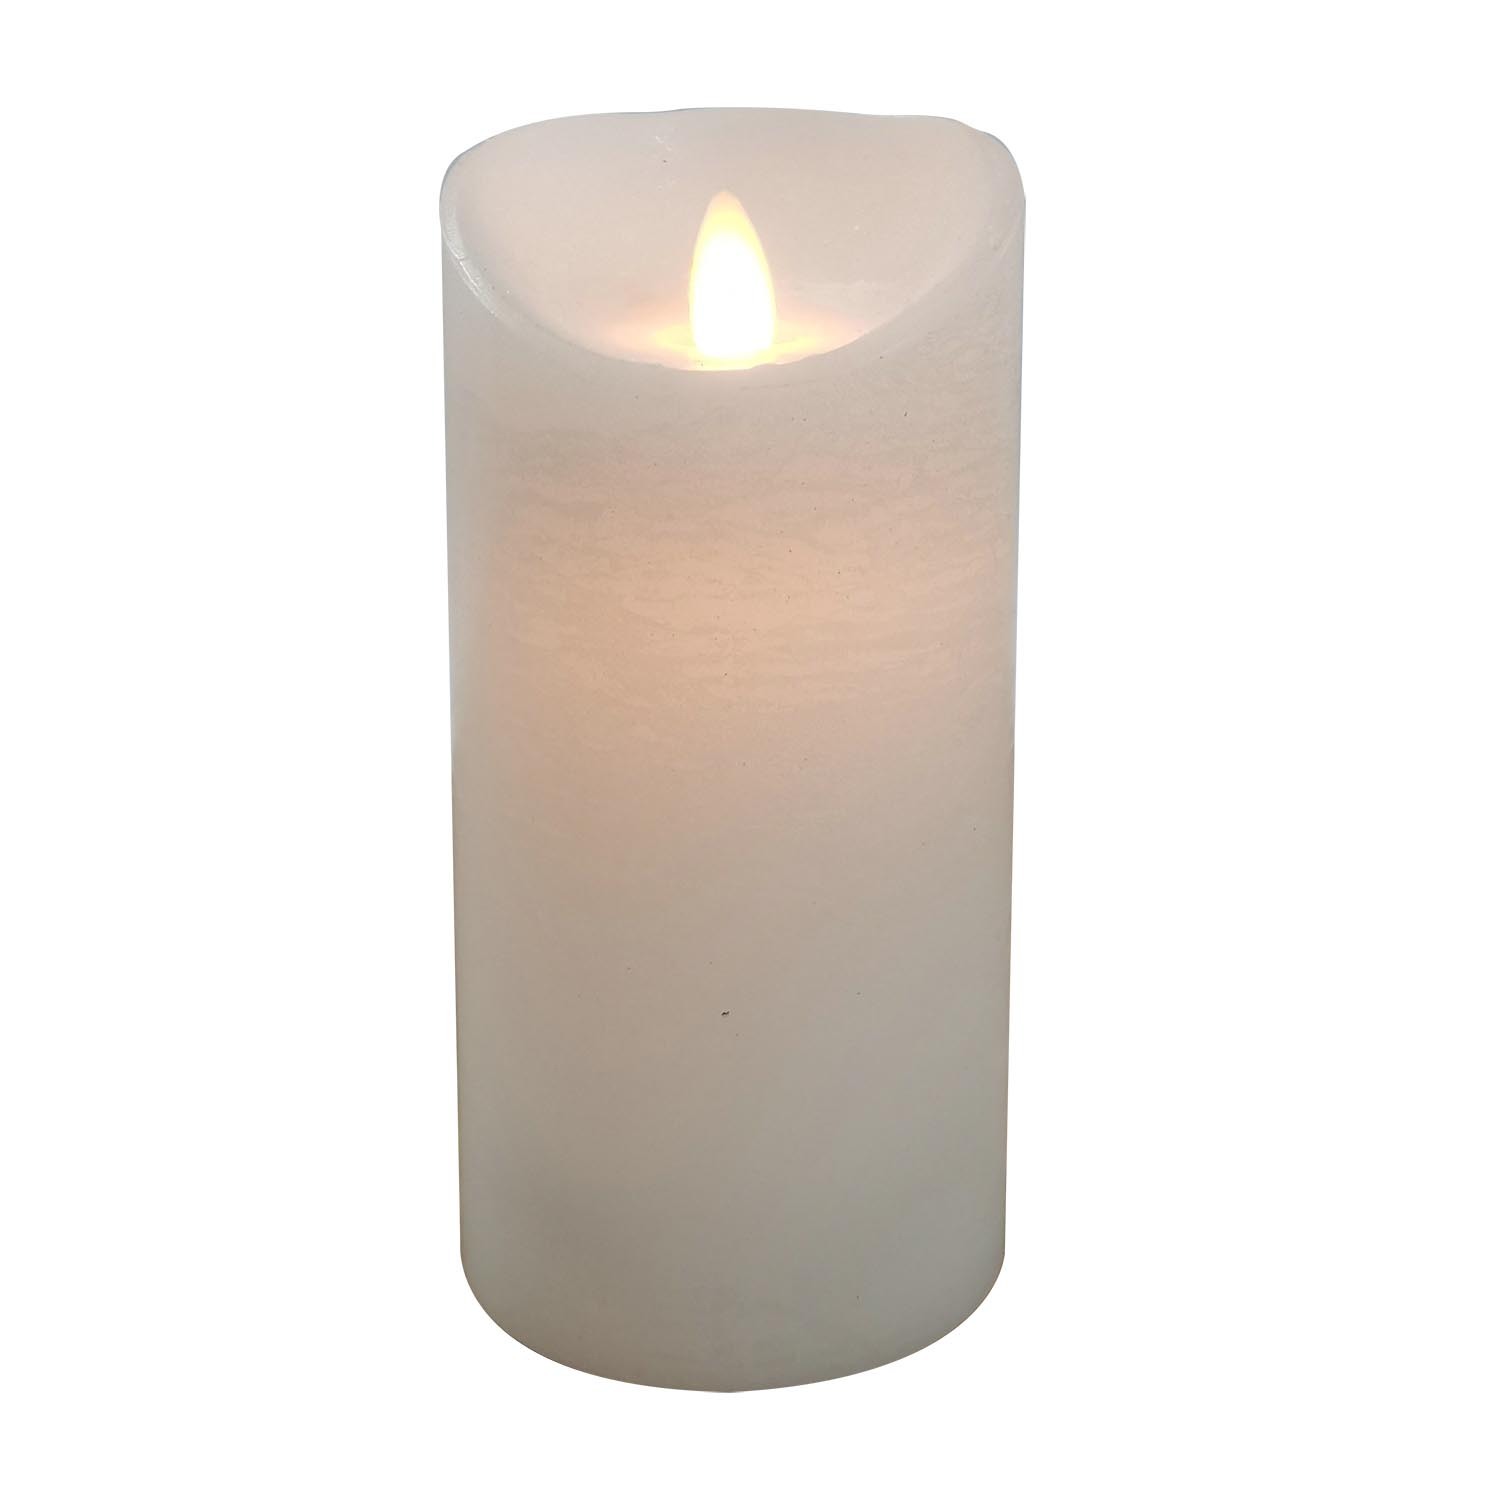 Tall Cosy Cotton LED Flameless Pillar Candle Image 1